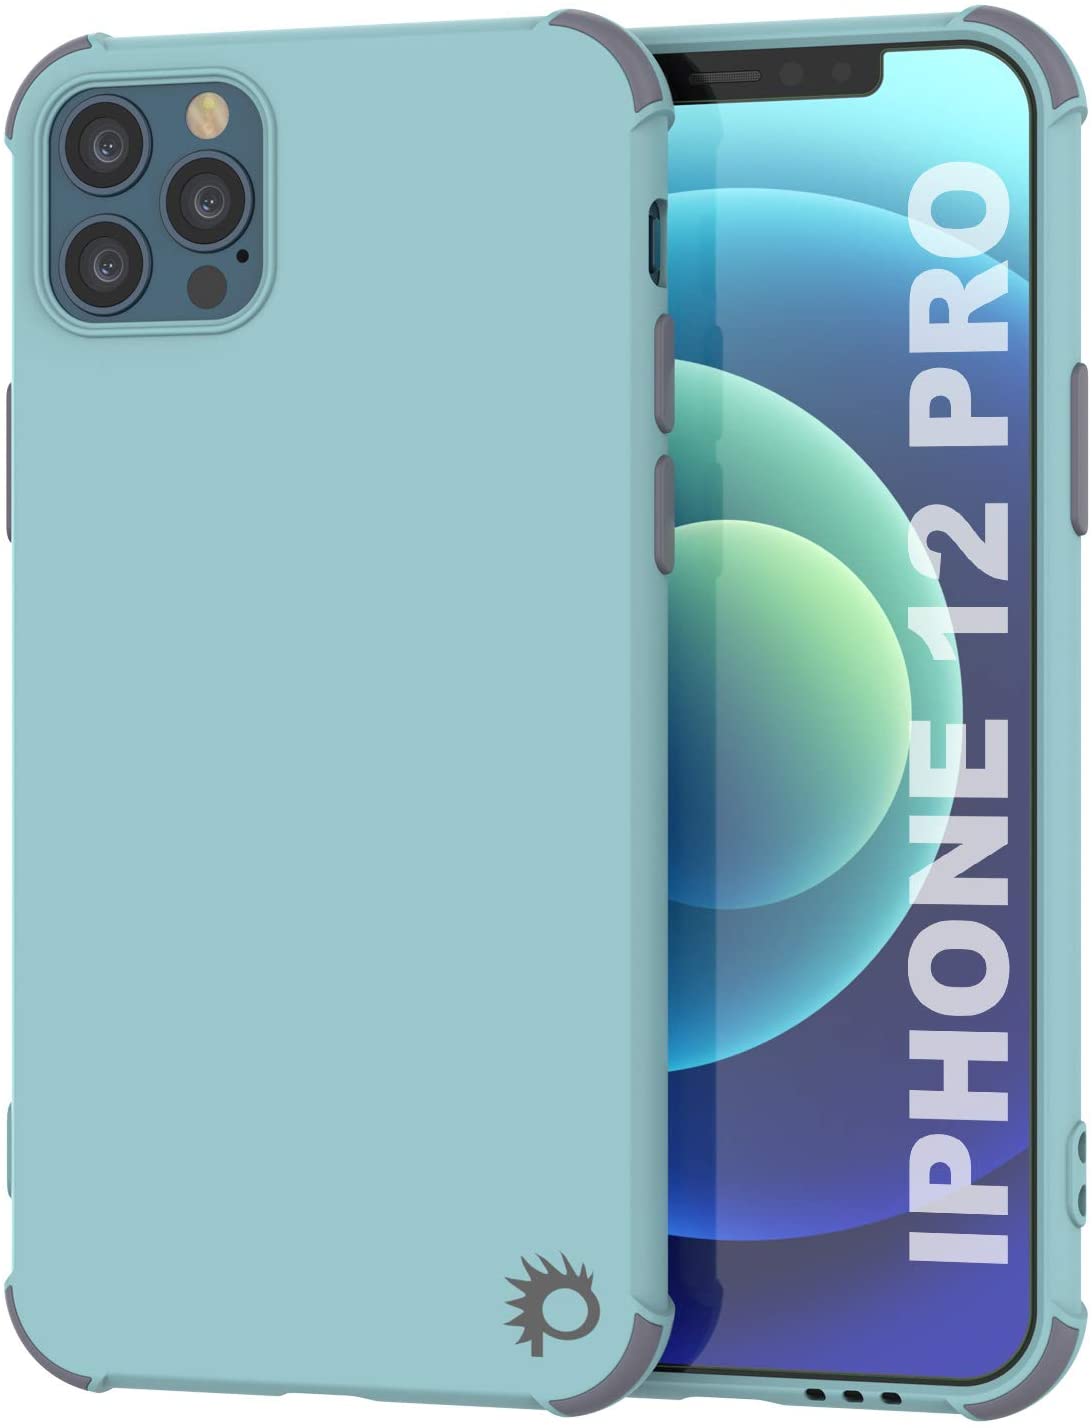 Punkcase Protective & Lightweight TPU Case [Sunshine Series] for iPhone 12 Pro [Teal]